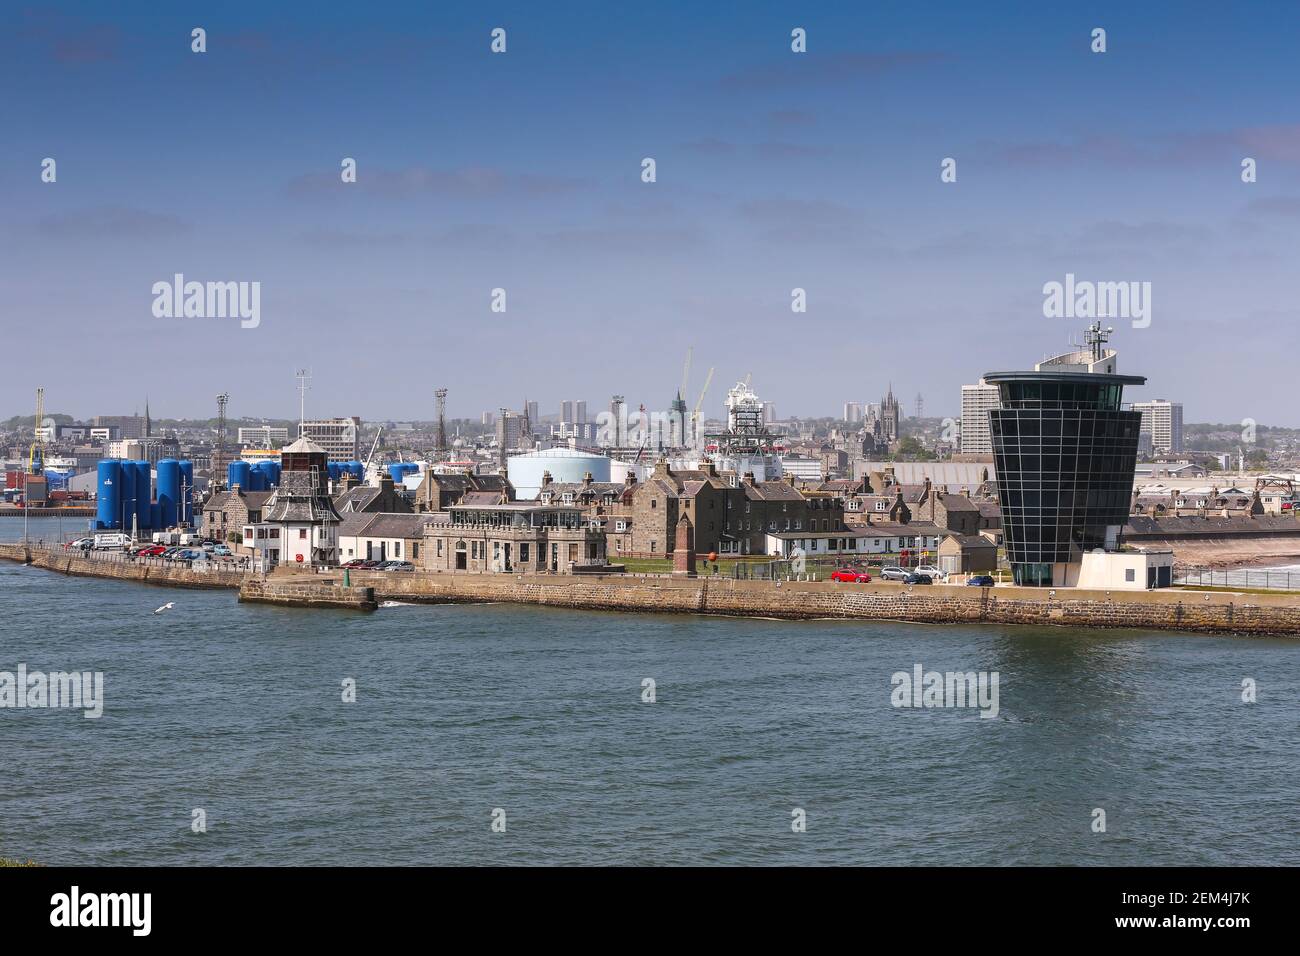 The harbour shipping control tower (right) with the old Roundhouse visible on the left, in Aberdeen, Scotland Stock Photo